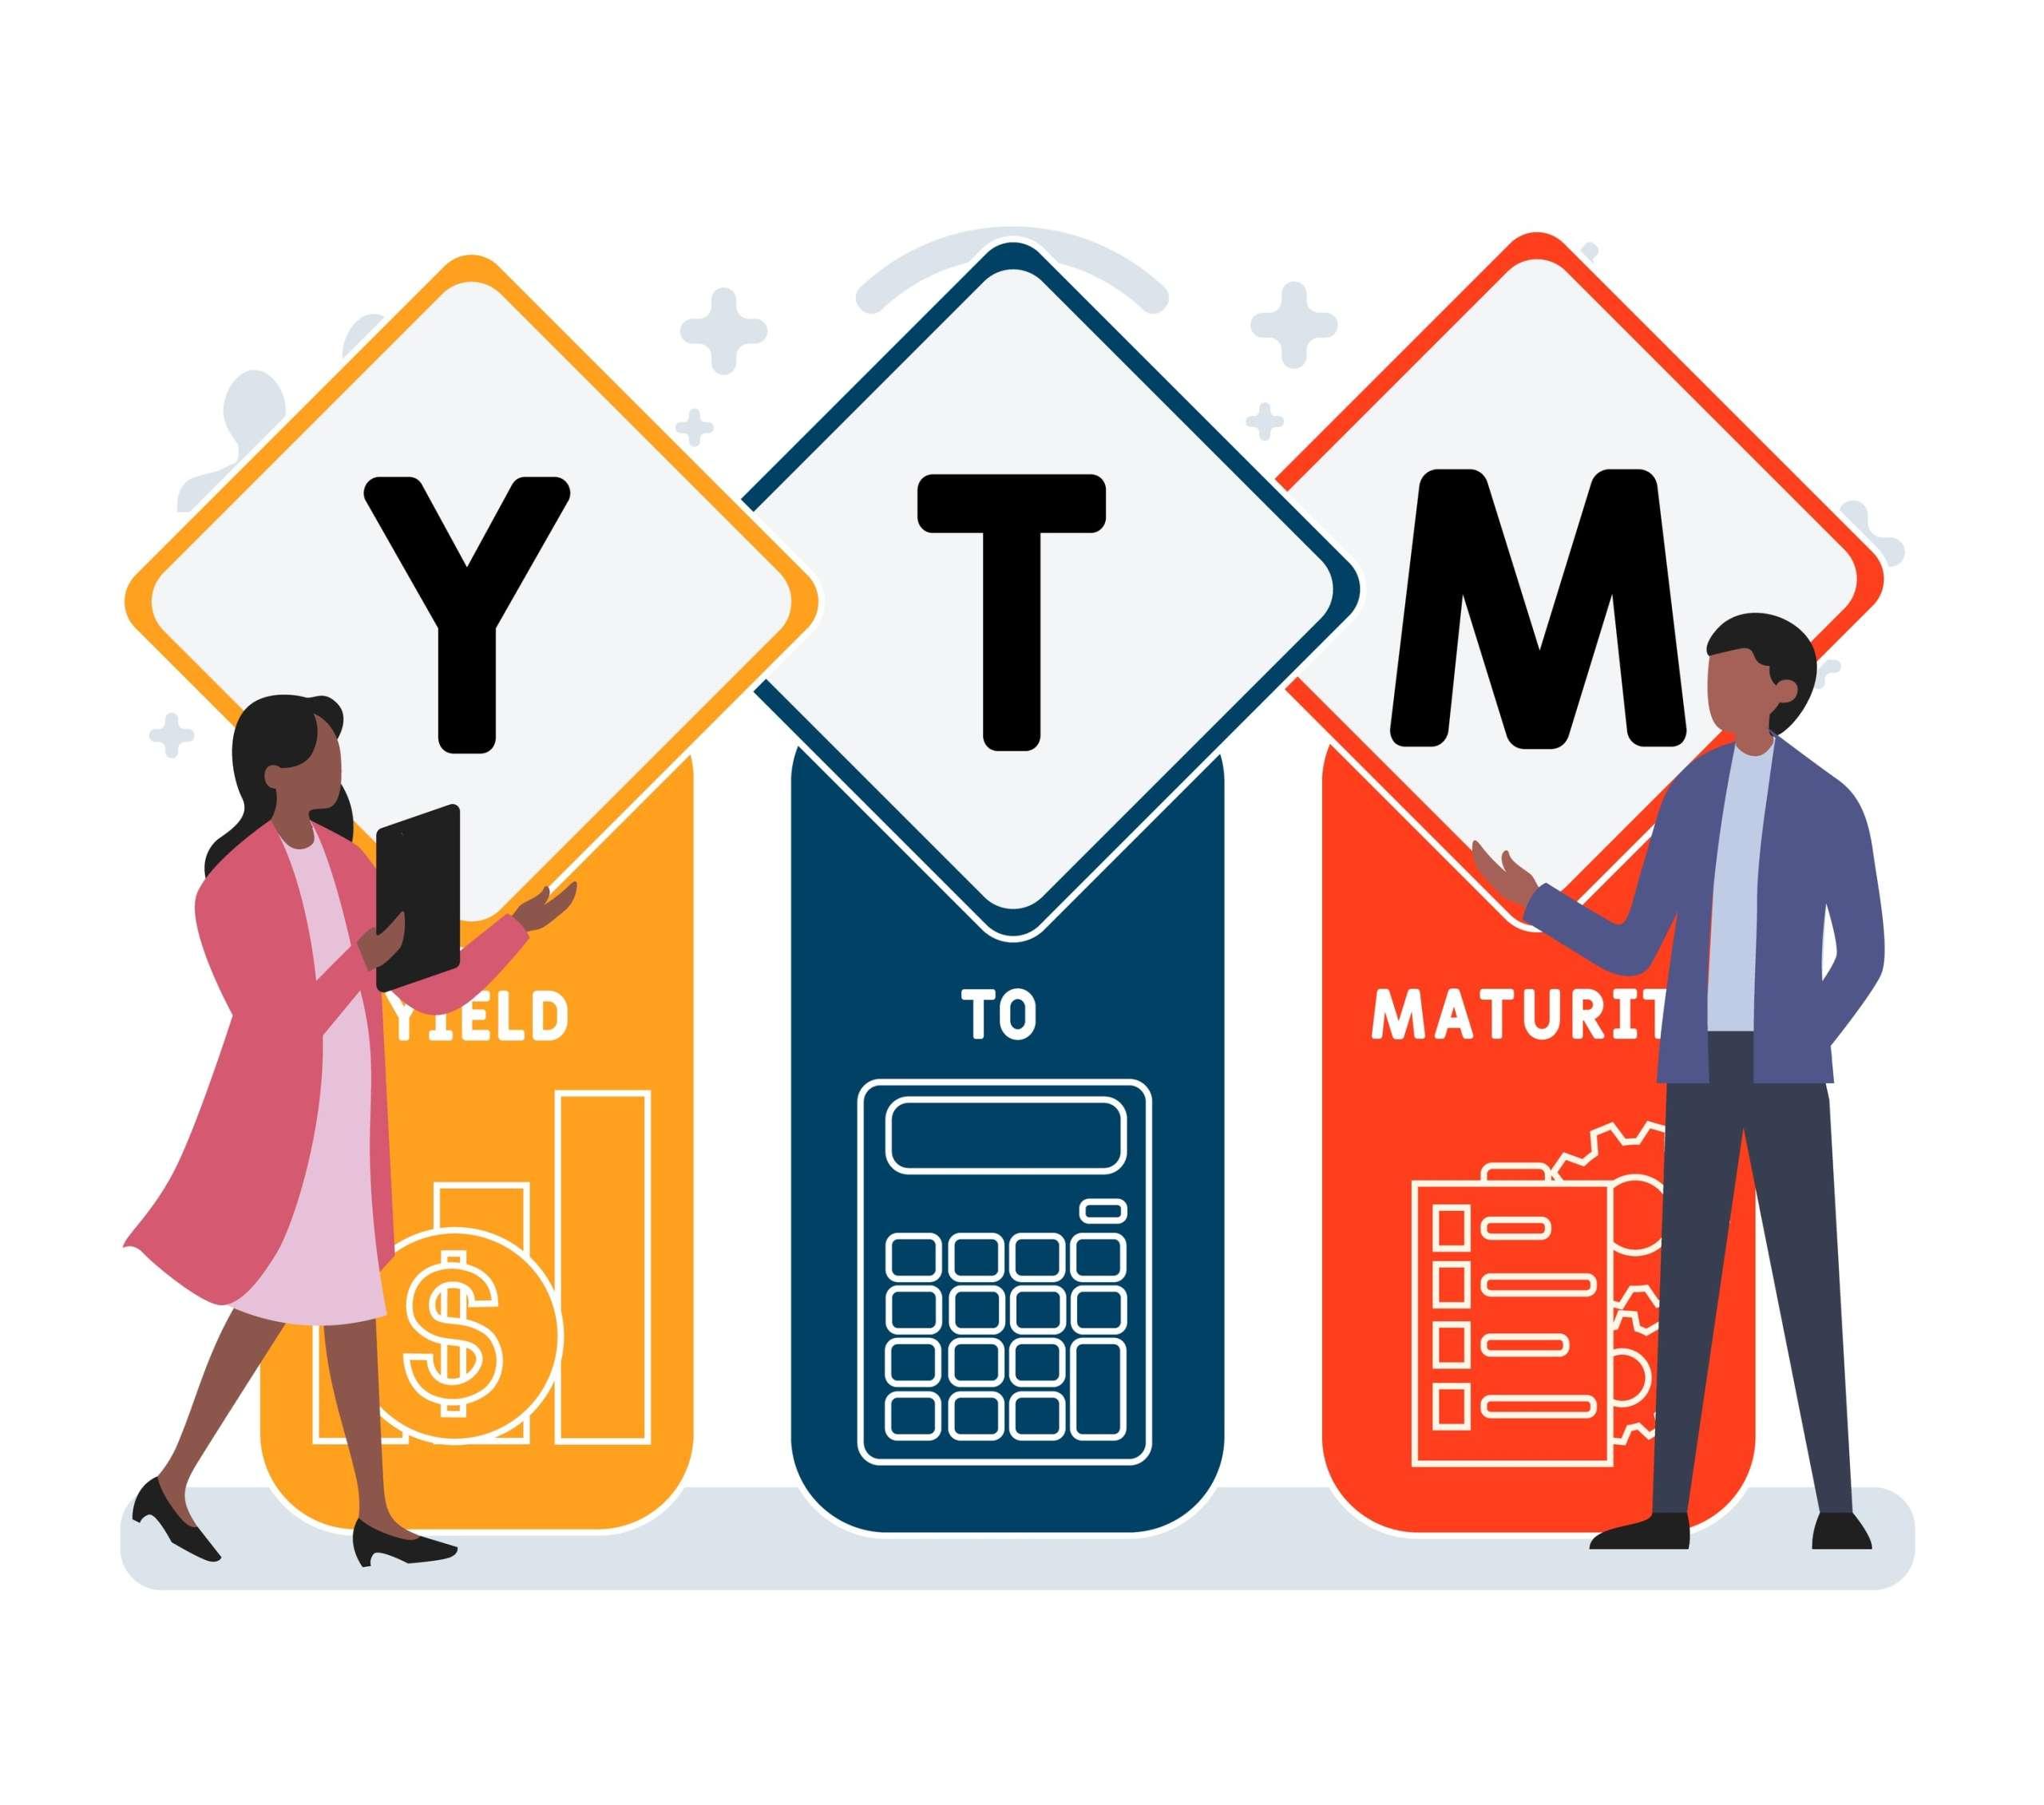 What is Yield to Maturity?